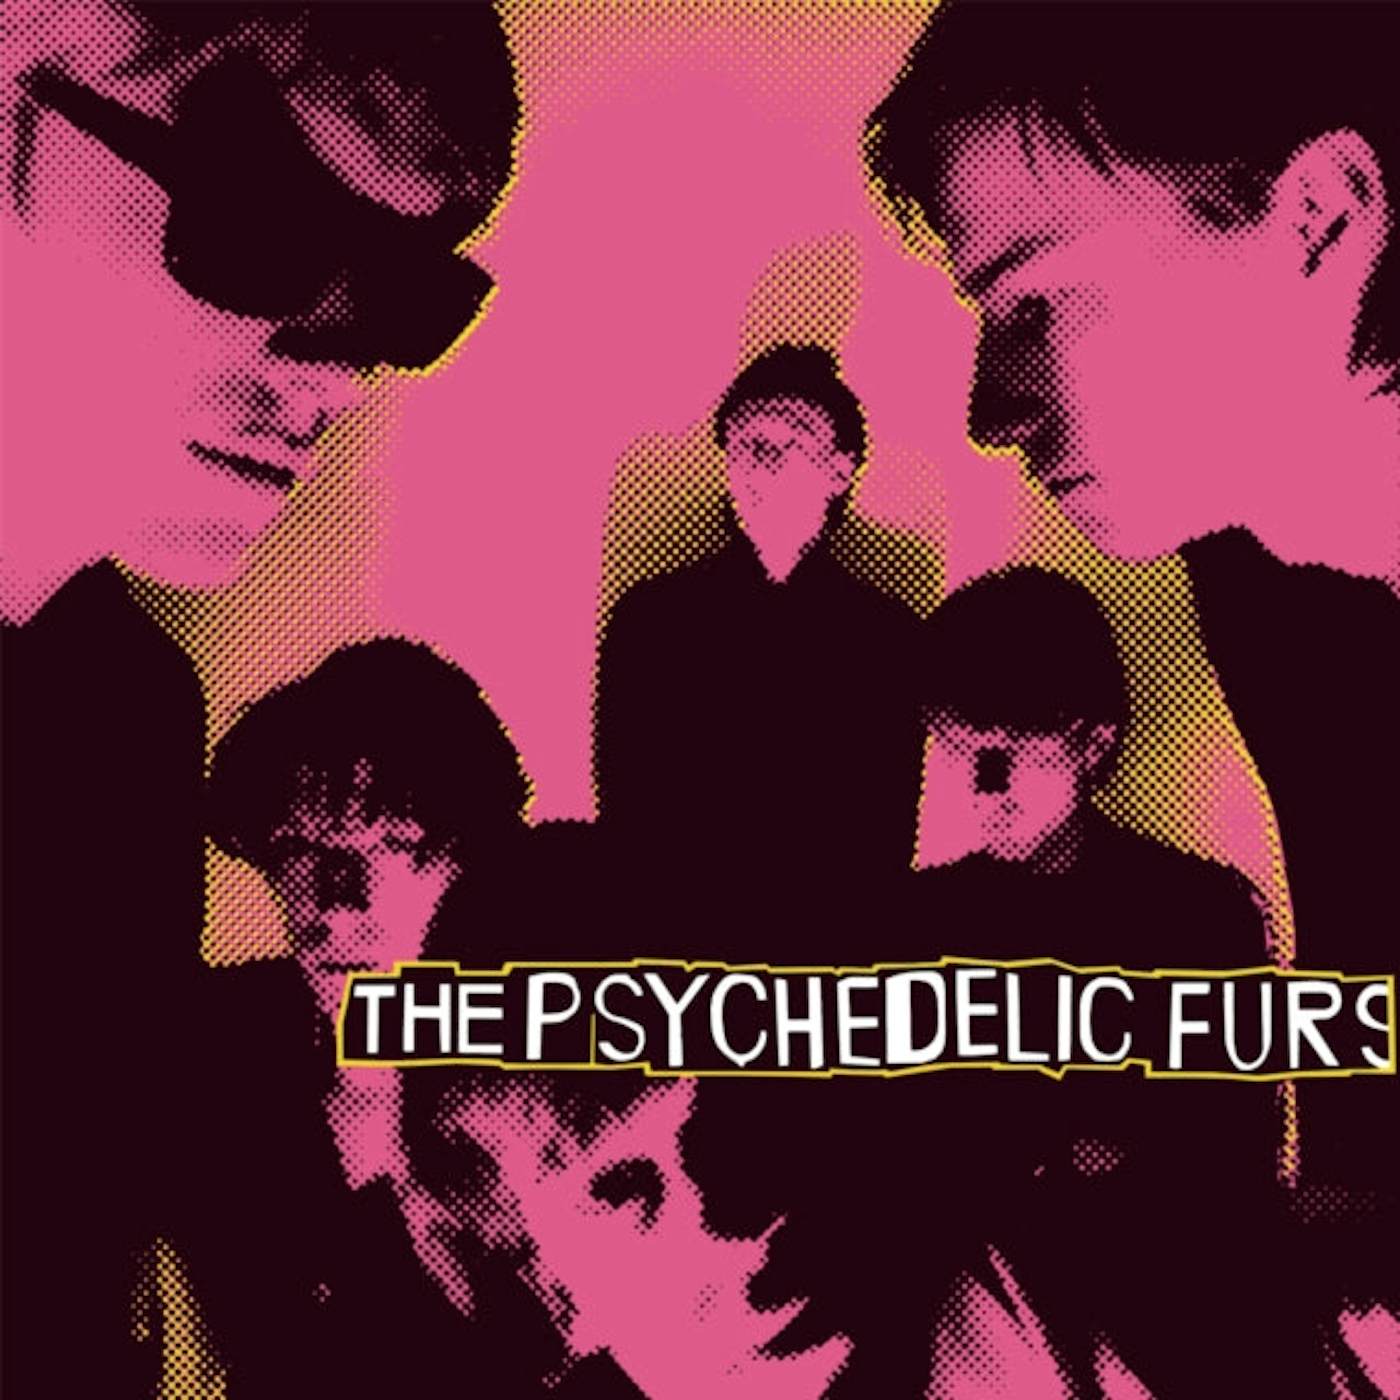 The Psychedelic Furs LP Vinyl Record - Psychedelic Furs